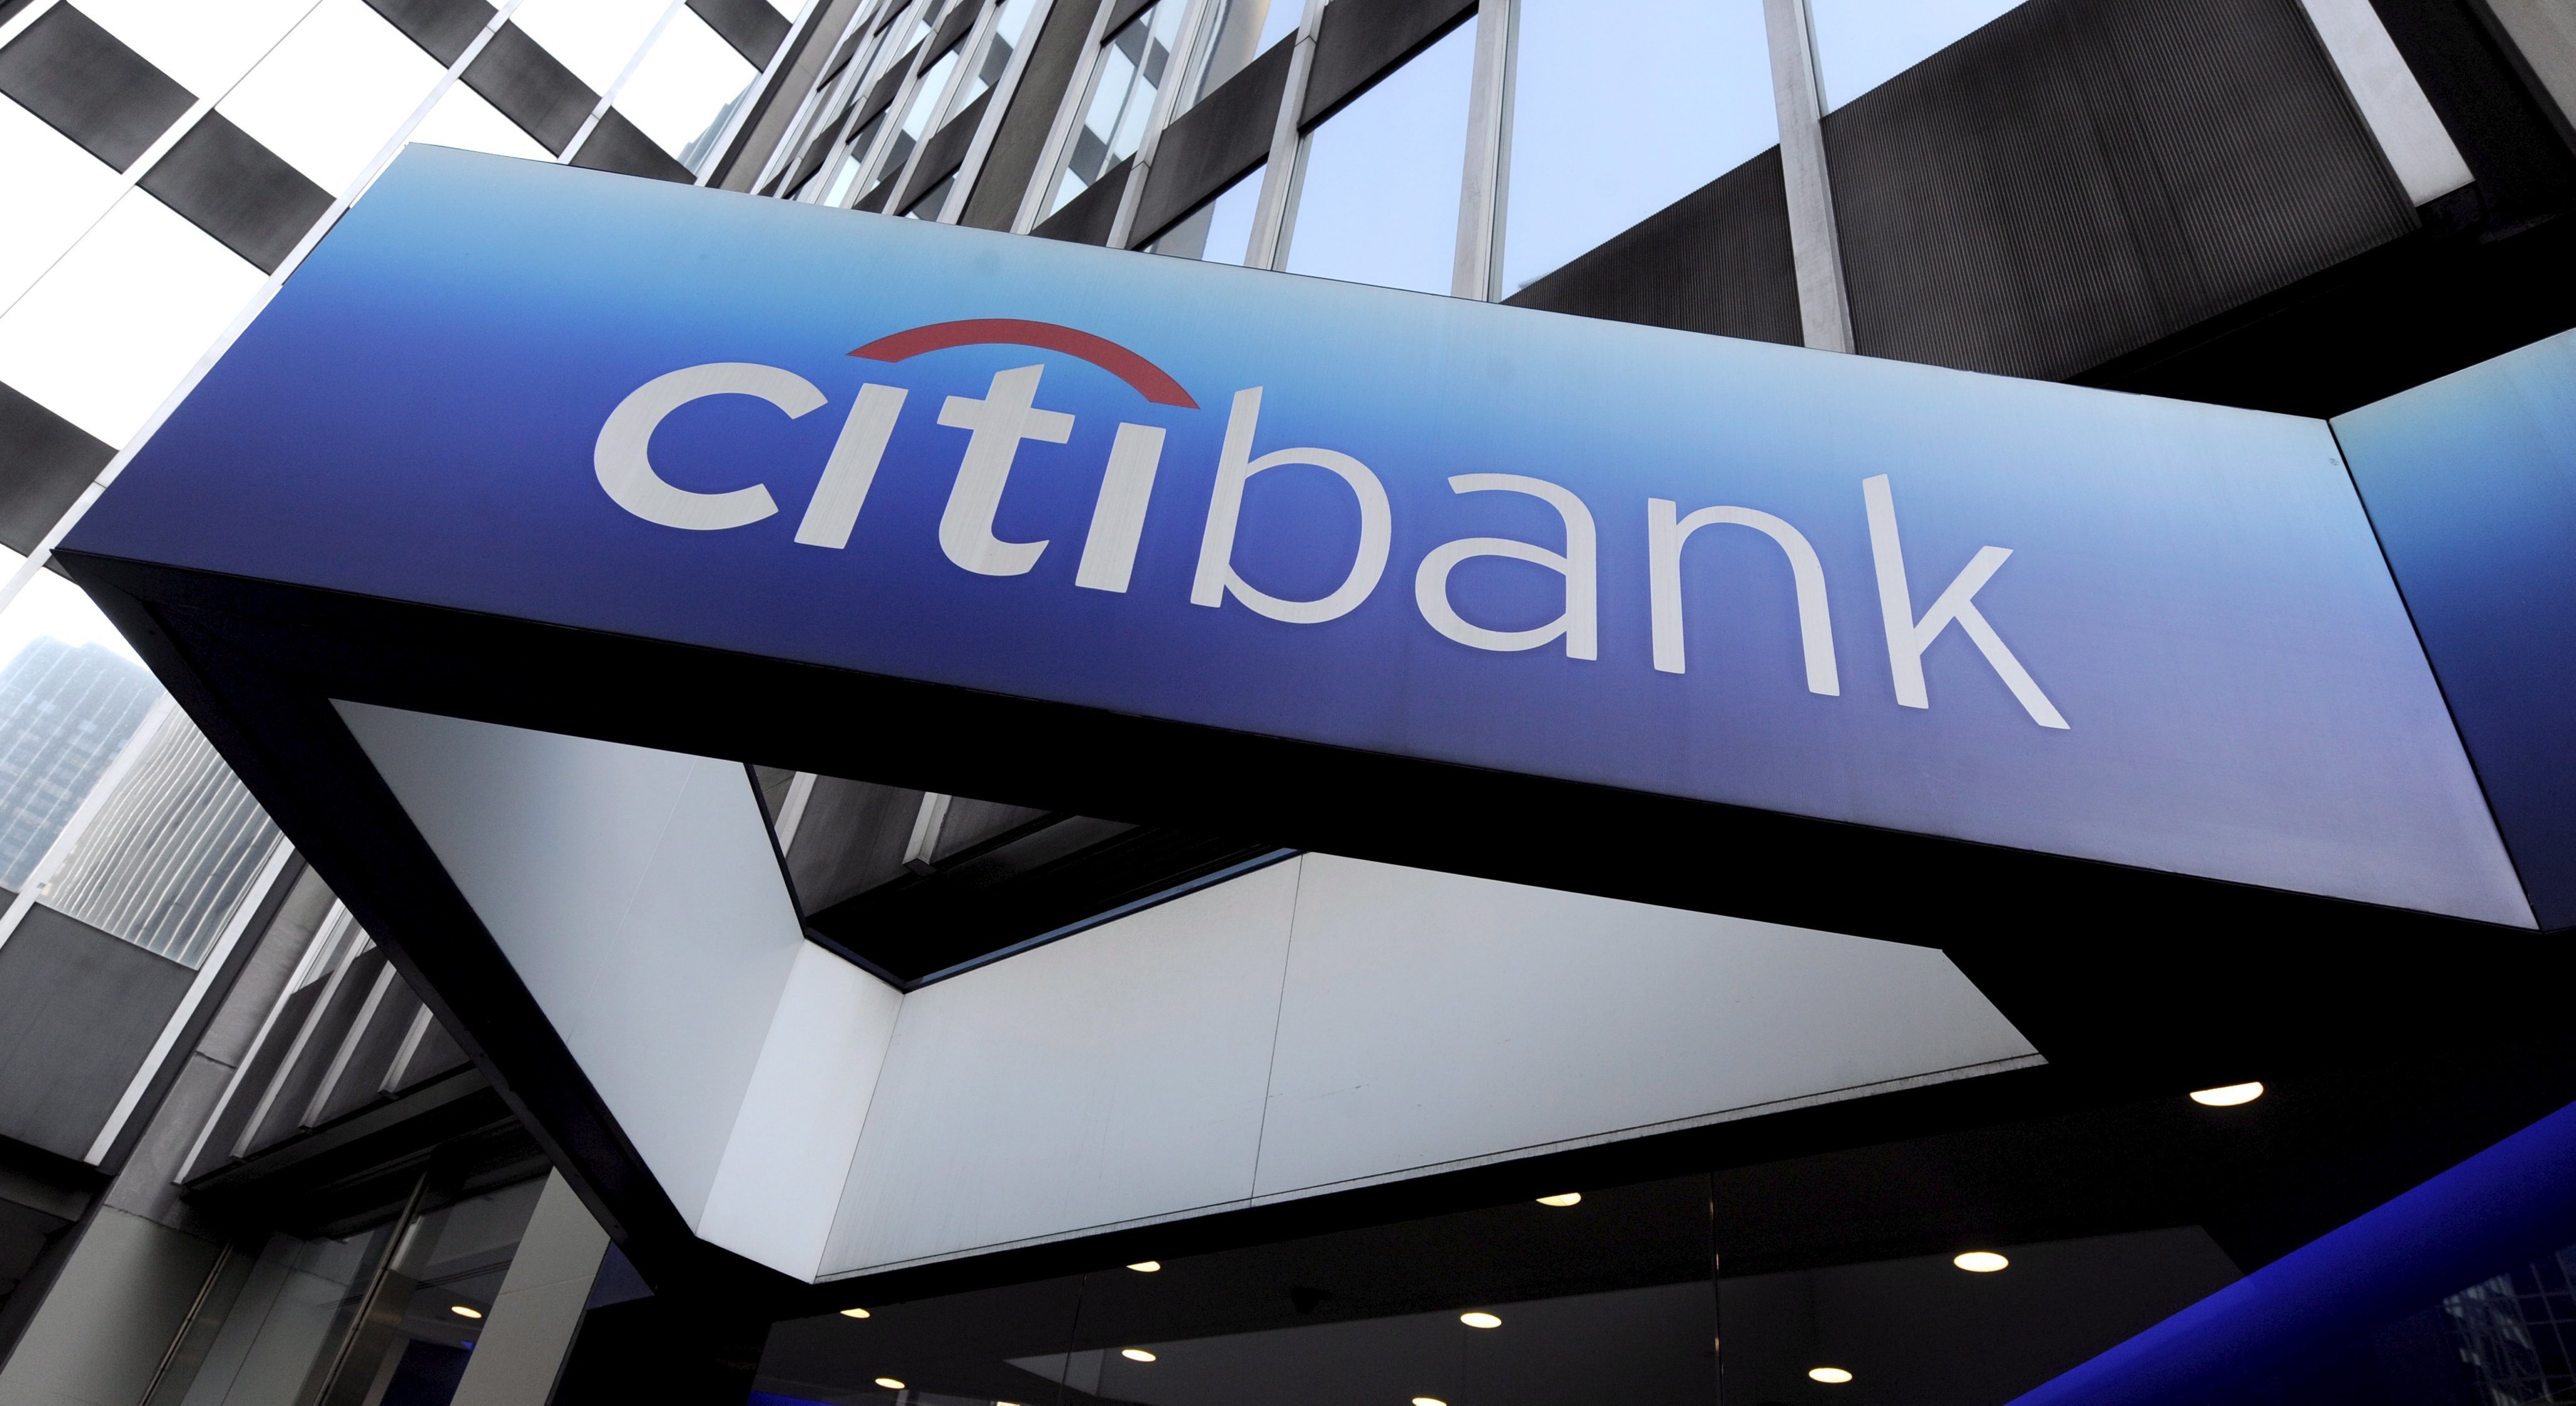 Citigroup will attempt to modernize by offering a new mobile banking app